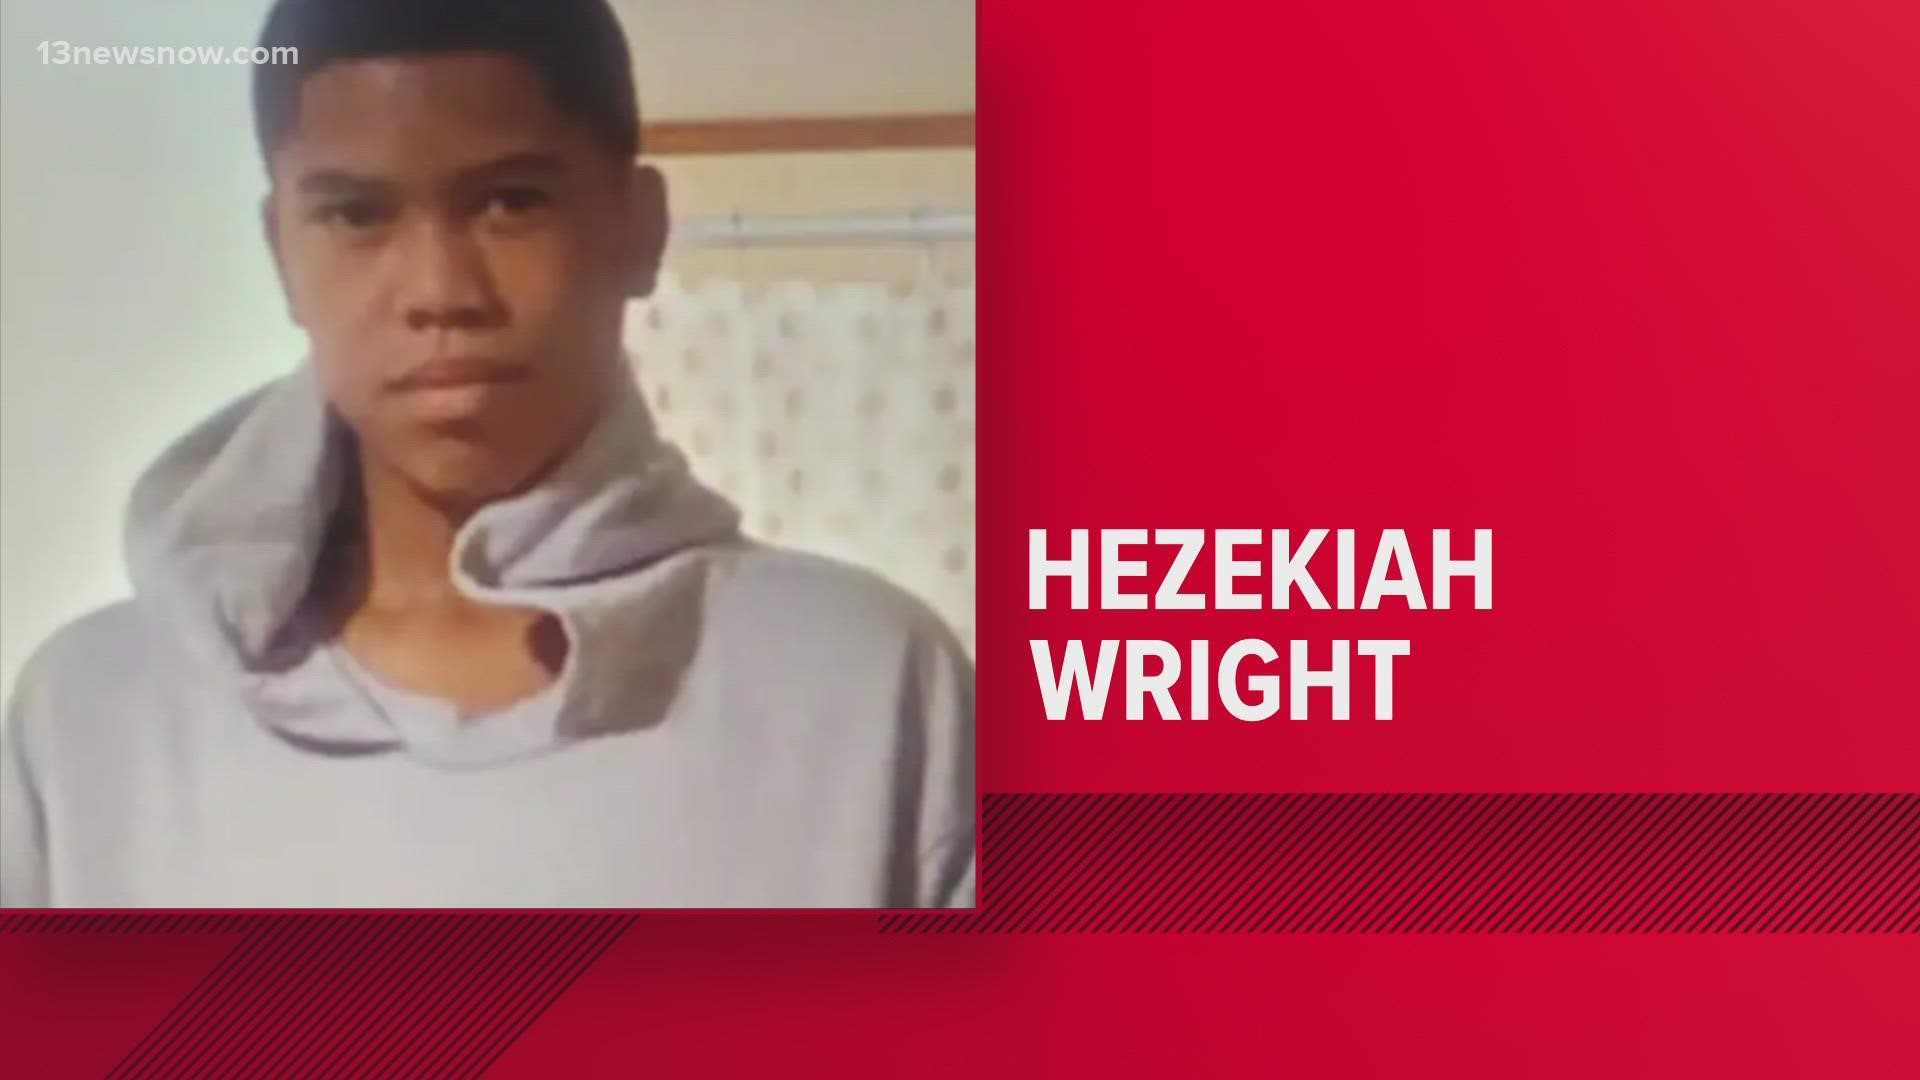 The department said 11-year-old Hezekiah Wright was last seen Friday morning on Windsor Castle Drive.